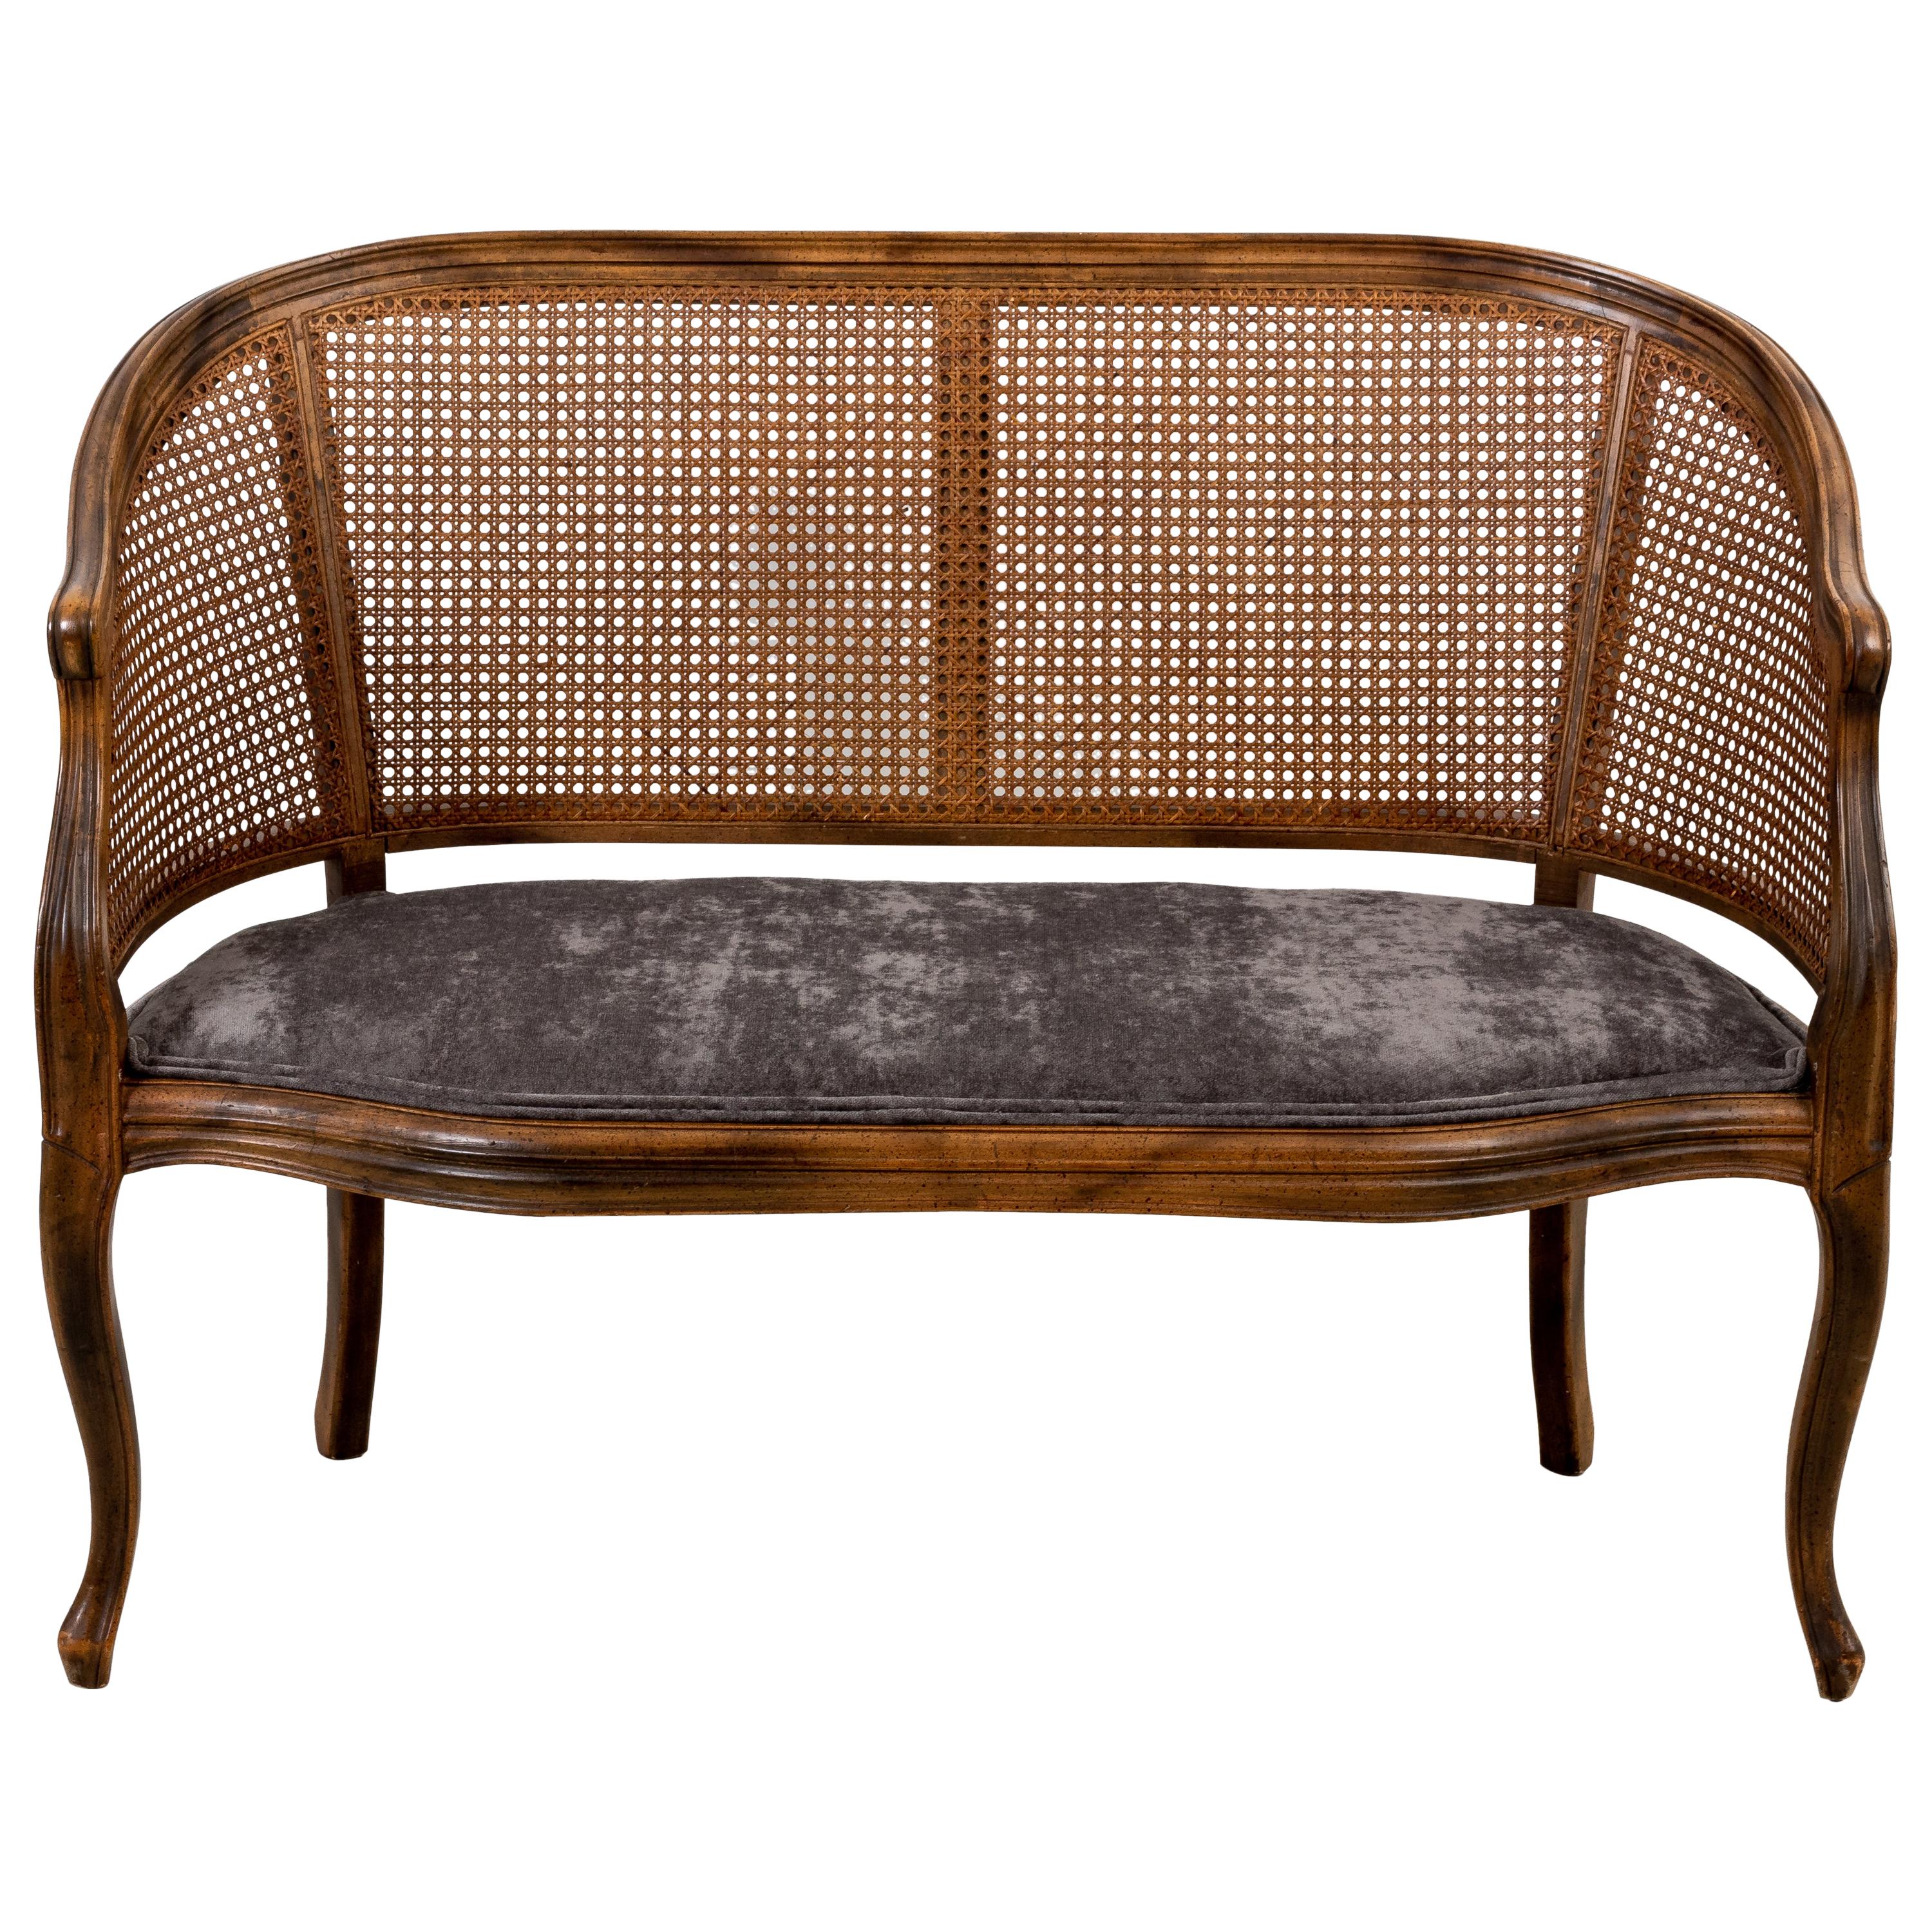 Caned Back Love Seat or Bench